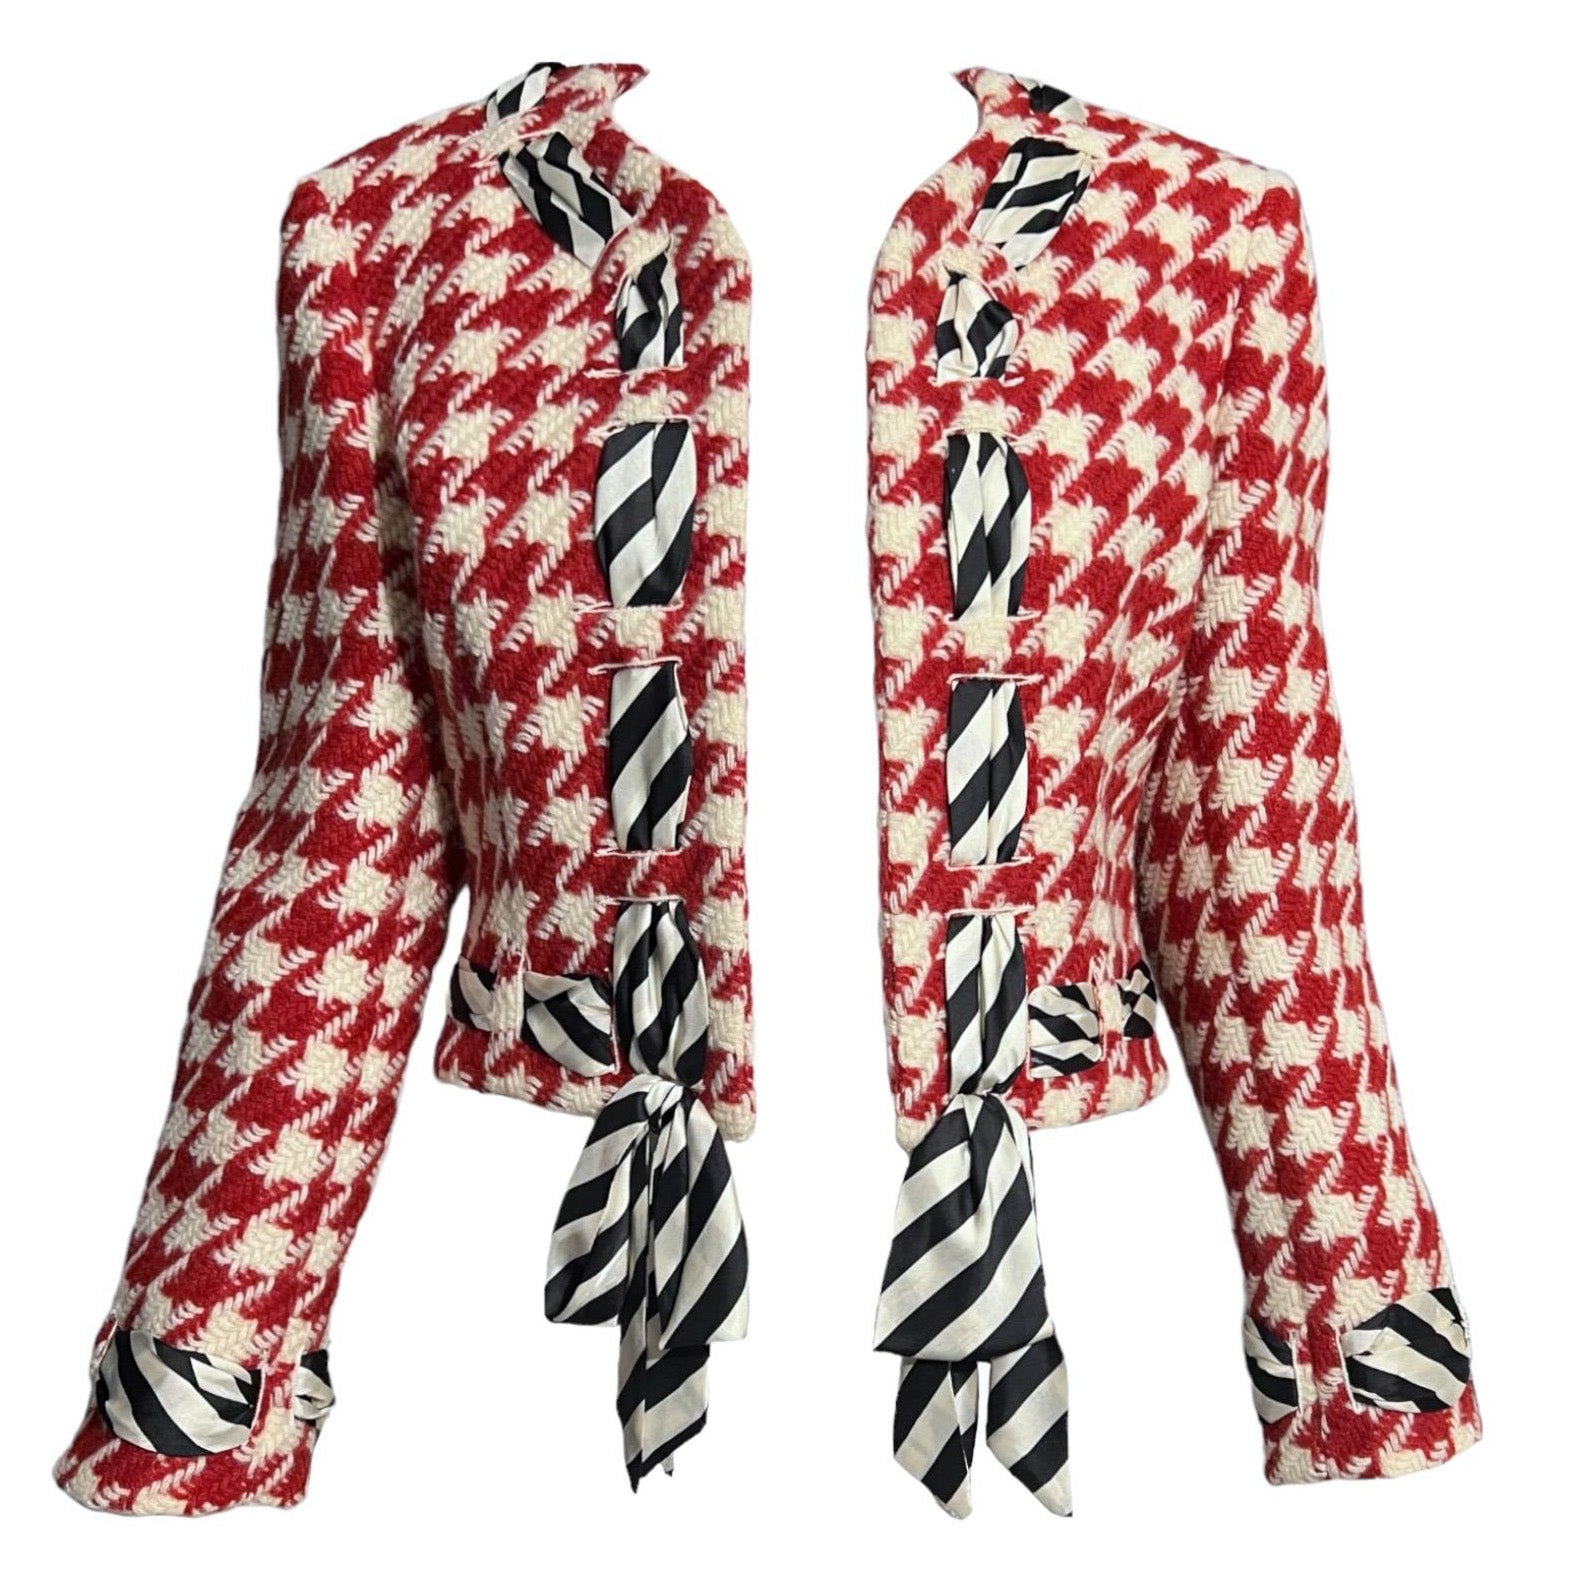 Moschino Cheap and Chic Vintage Houndstooth Jacket as seen on Princess Diana